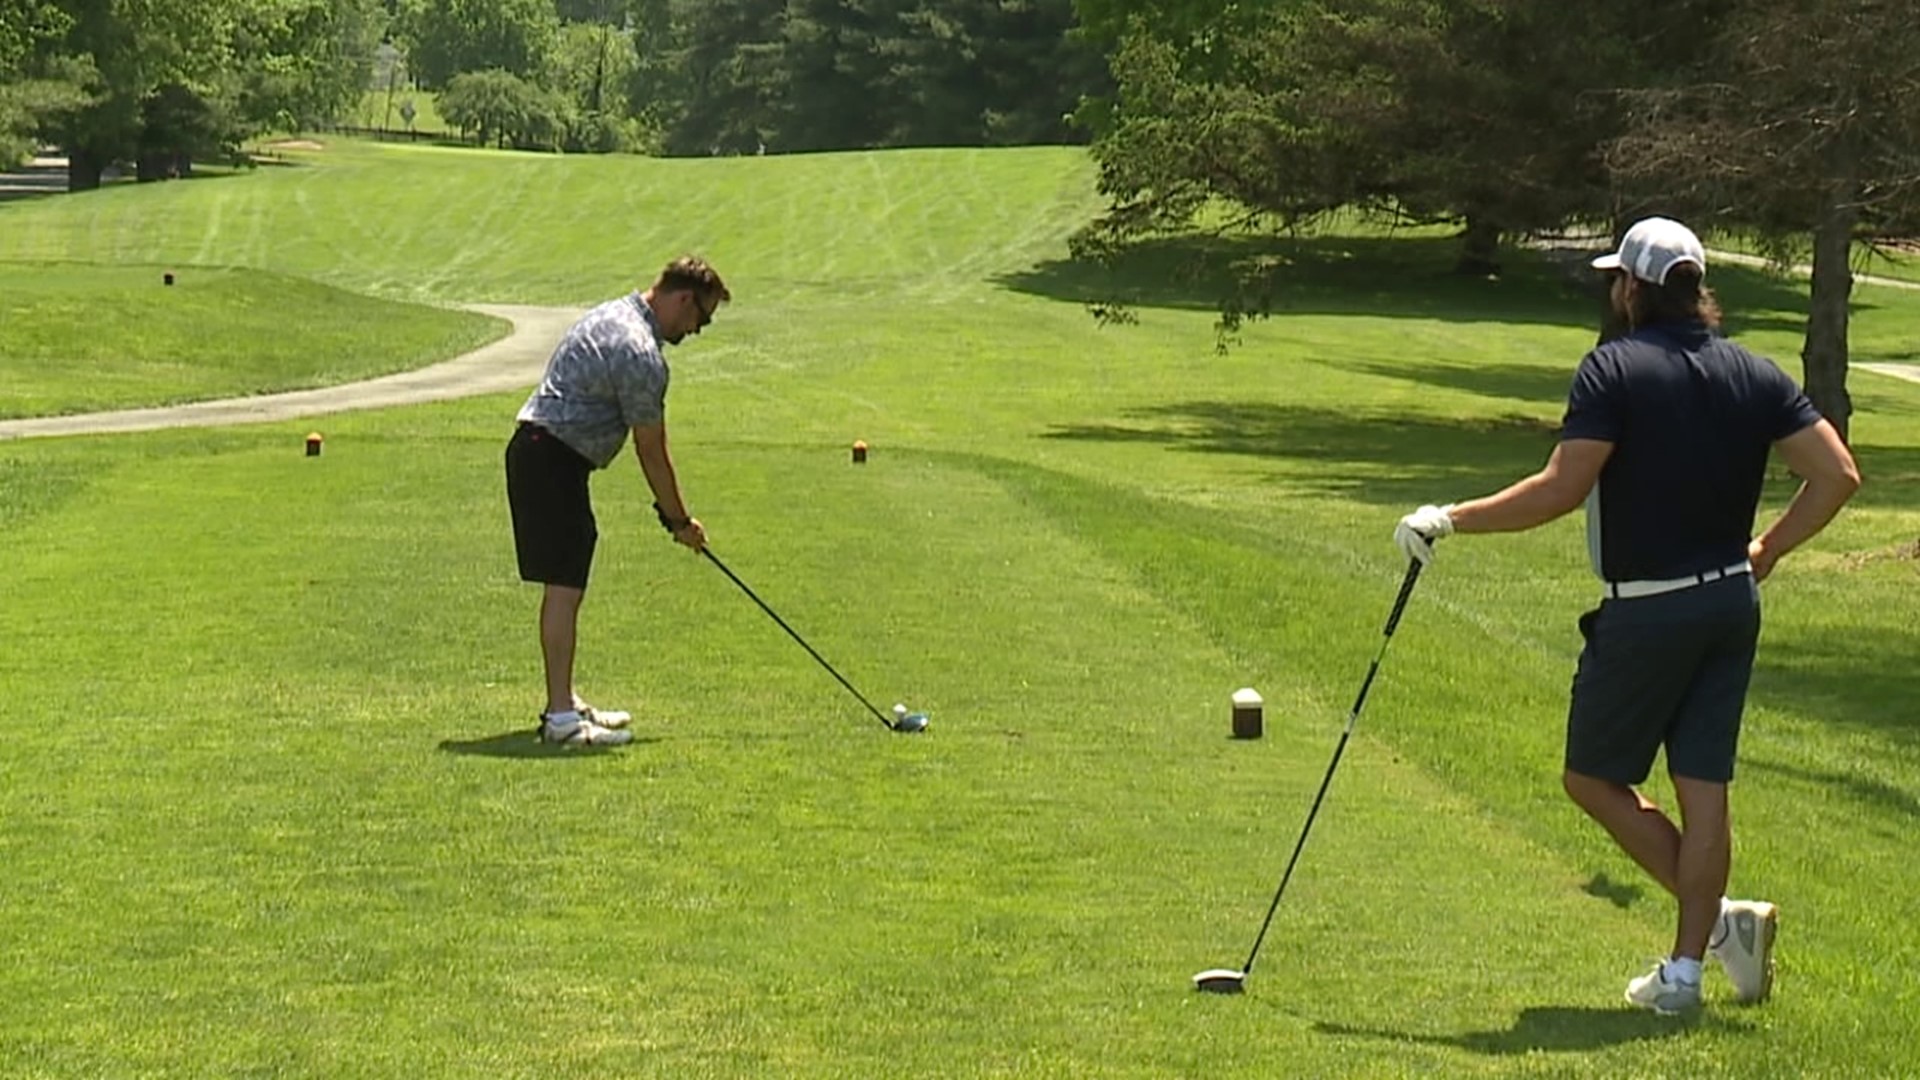 Golfers hit the links in the heat in part of Wyoming County to raise money for Leukemia and Lymphoma Research.